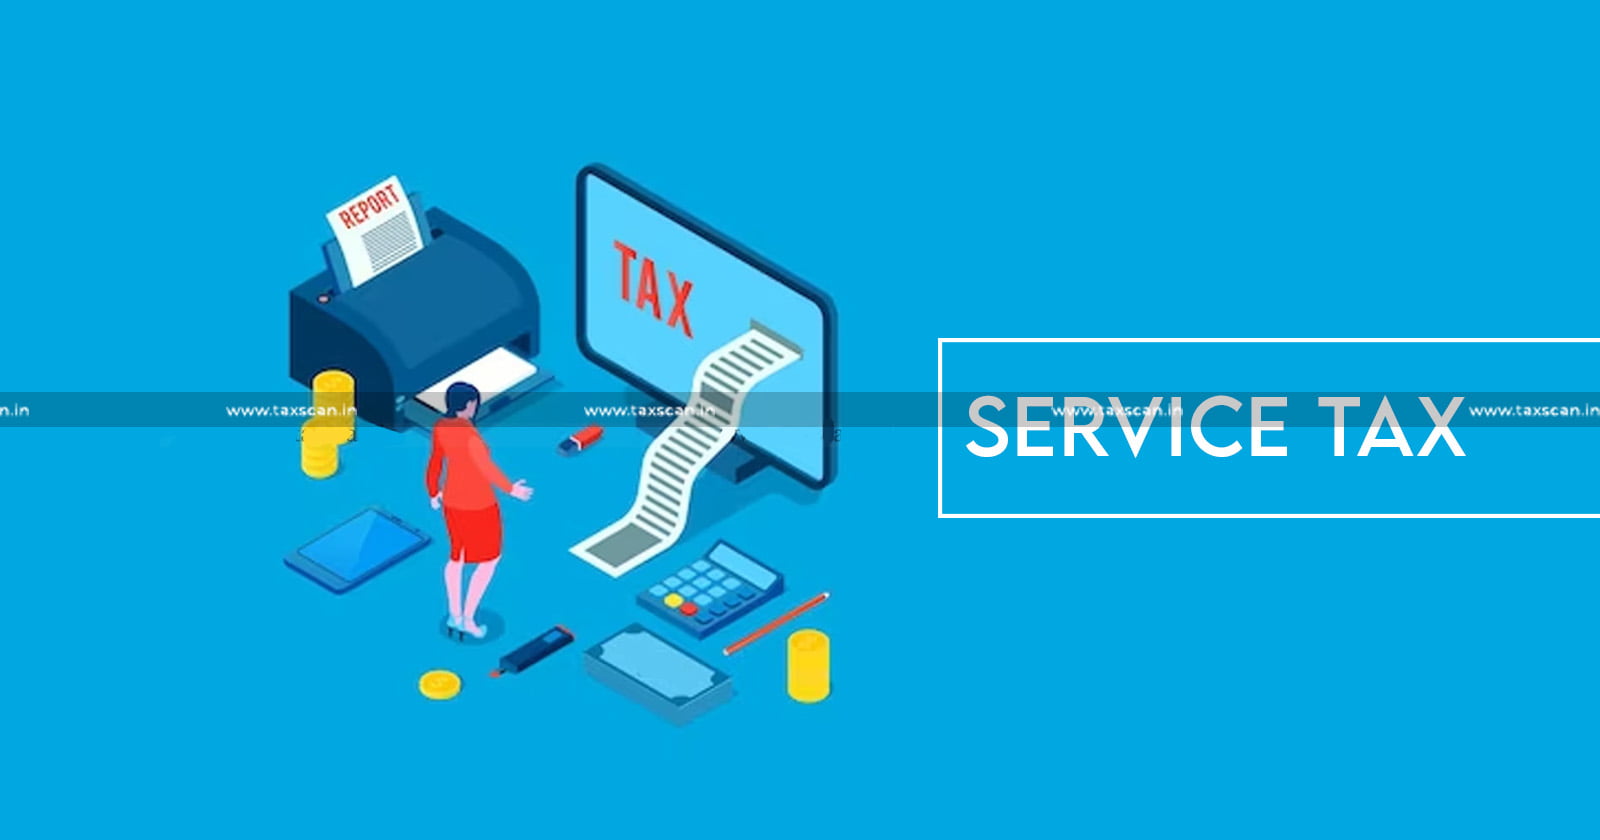 Service Tax Paid by Contractor for Value of Work is not Part of Gross Receipts - Service Tax Paid by Contractor - Service Tax - Contractor - ITAT - Taxscan